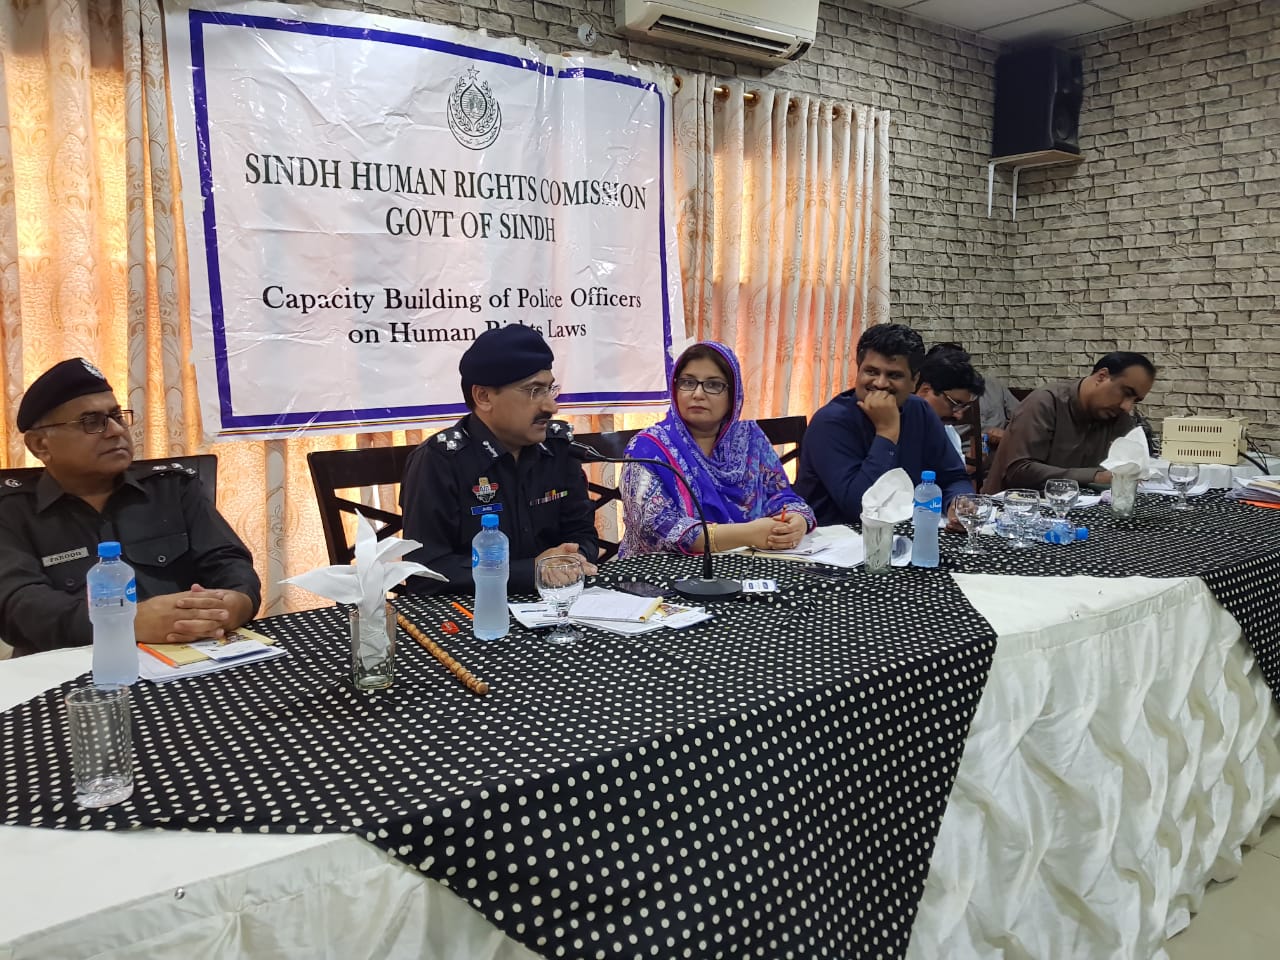 Capacity Building of Police Officer Human Rights Law